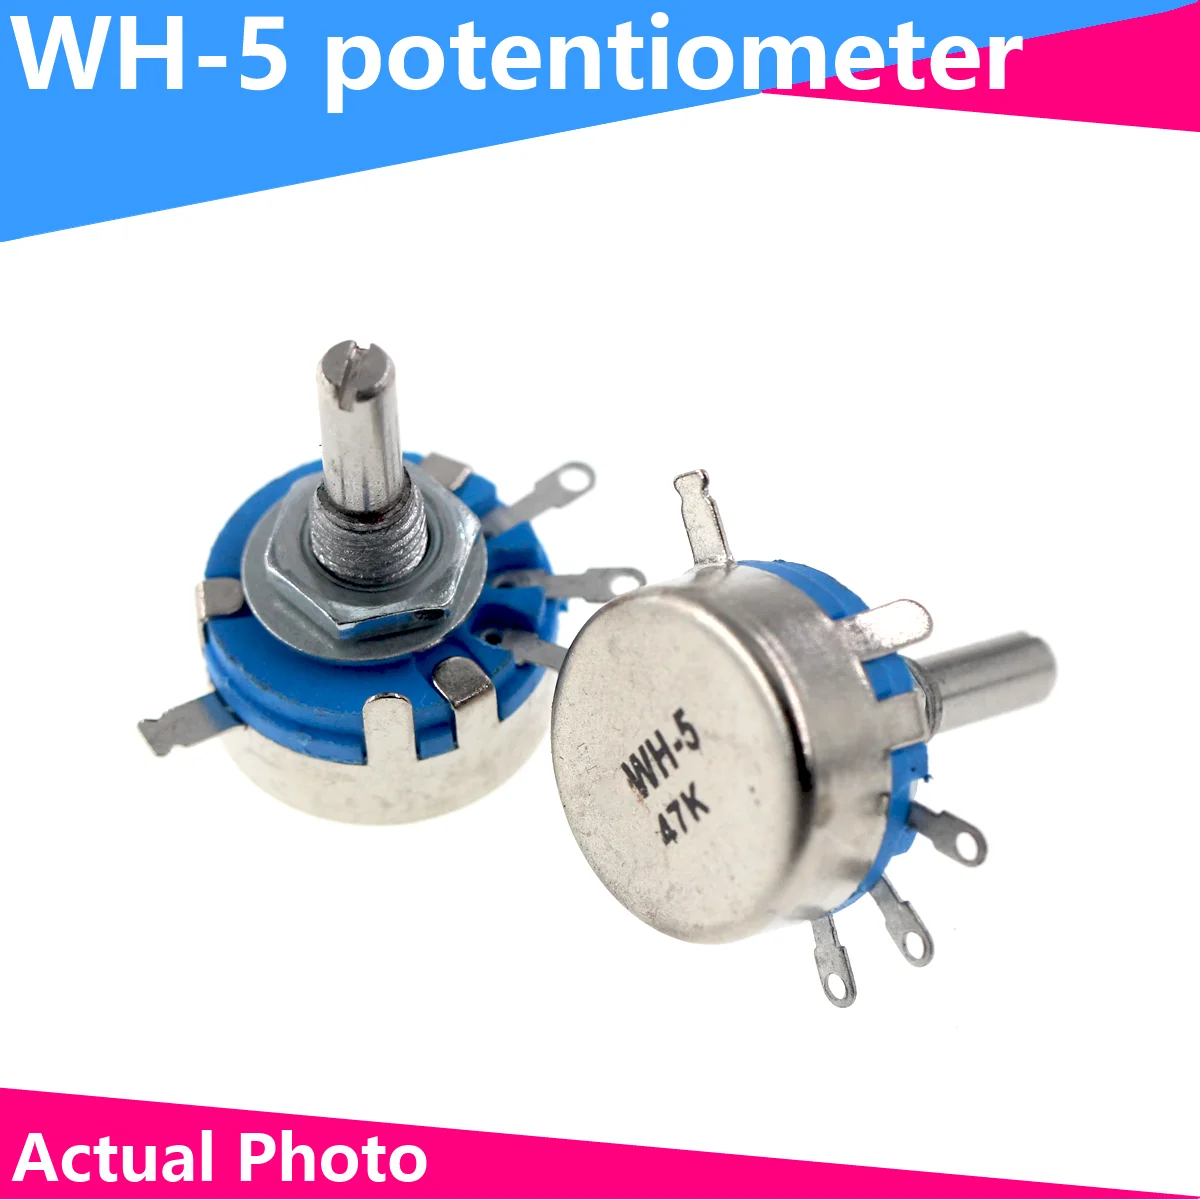 2PCS WH5-1A 470R 1K 10K 47K 4K7 100K 470K 220K 1K5 22K 1M ohm 3-Terminals Round Shaft Rotary Taper Carbon Potentiometer WH5 10pcs wh5 1a 470r 1k 10k 47k 4k7 100k 470k 220k 1k5 22k 1m ohm 3 terminals round shaft rotary taper carbon potentiometer wh5